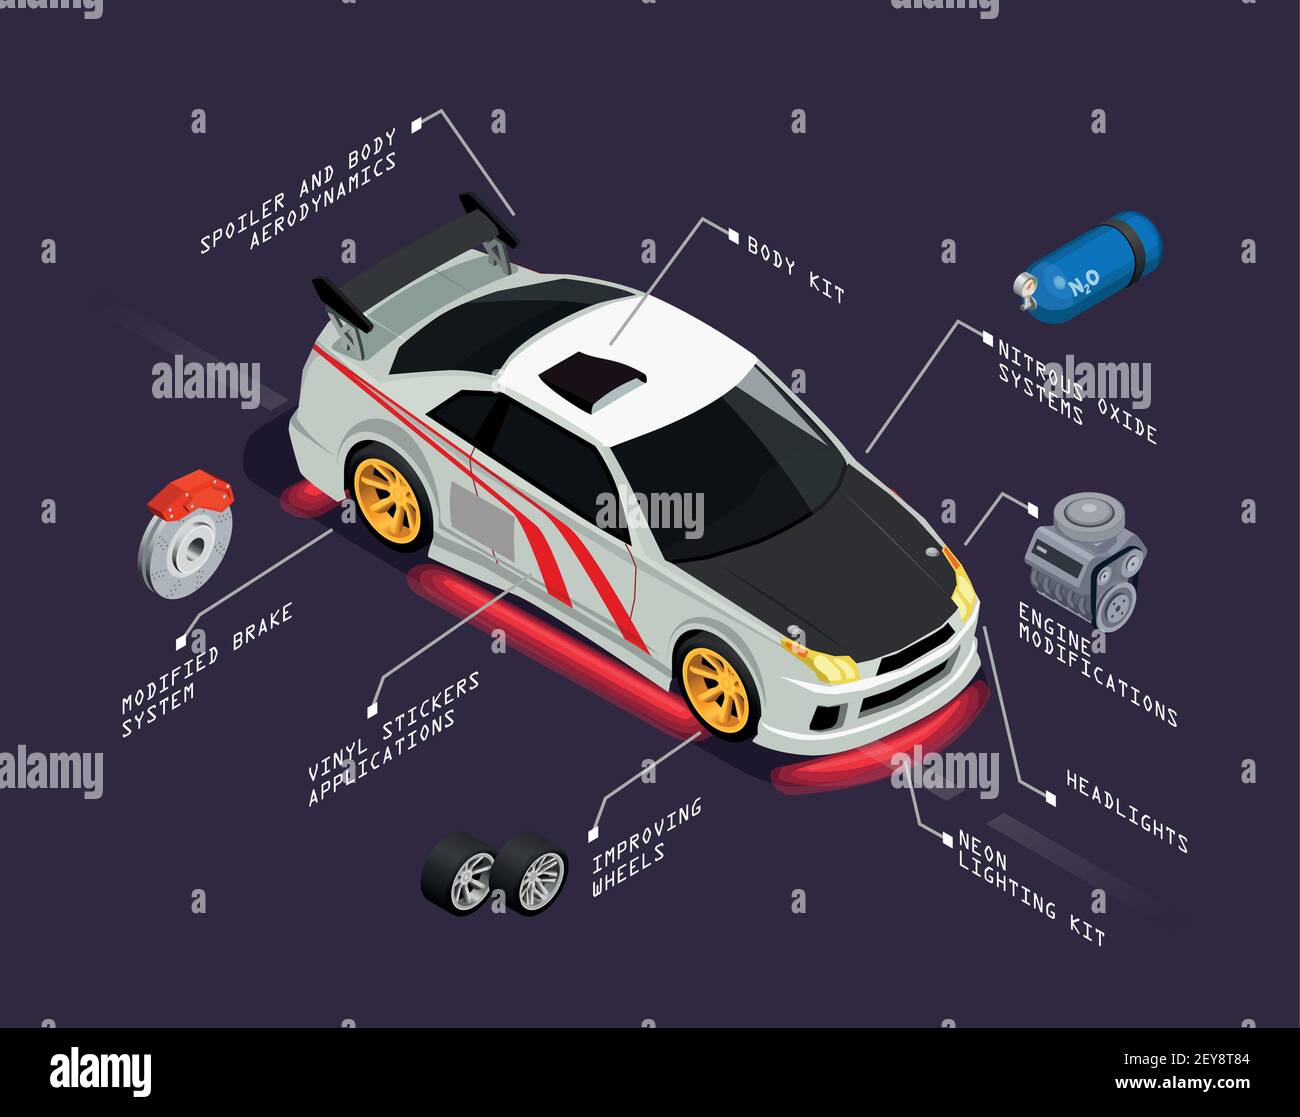 Car tuning isometric poster representing automobile with improving wheels nitrous oxide systems headlights vinyl stickers body kit elements vector ill Stock Vector